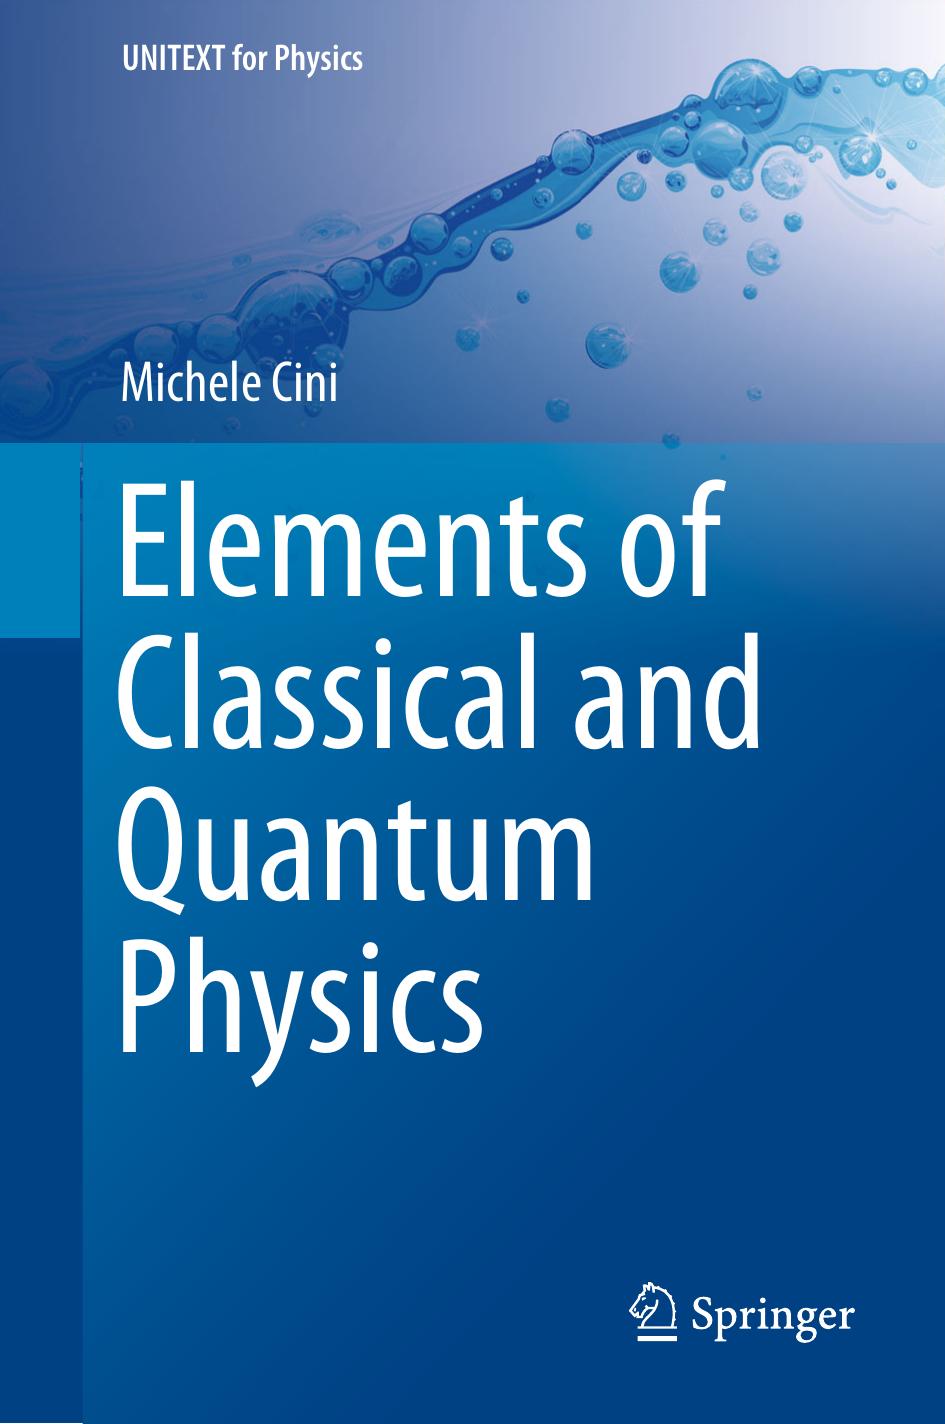 Elements of Classical and Quantum Physics by Michele Cini